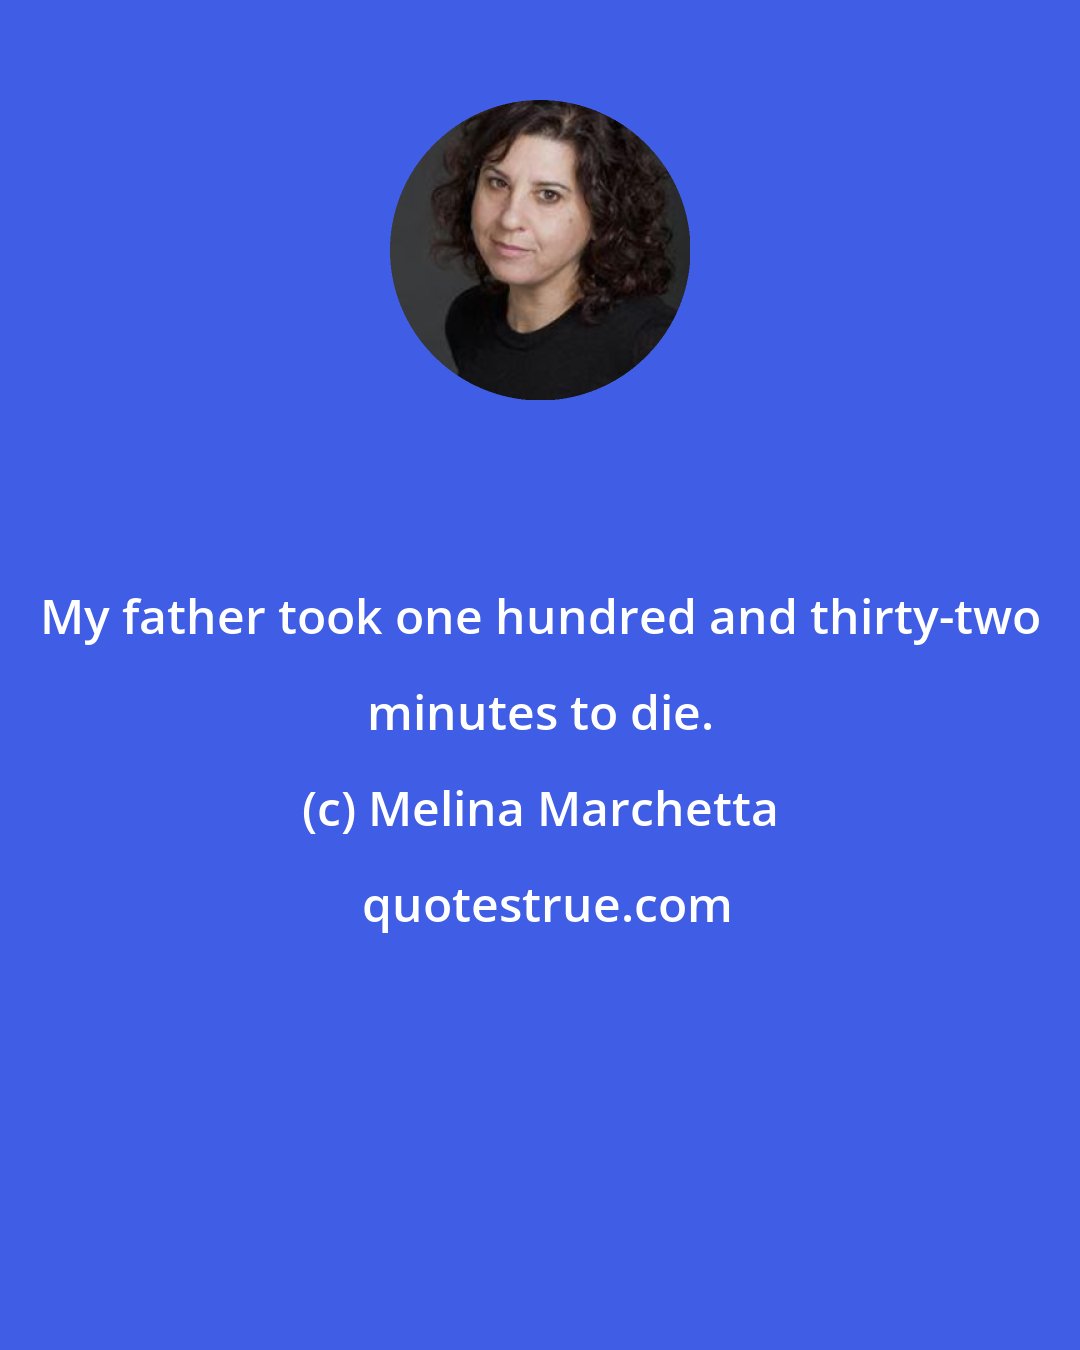 Melina Marchetta: My father took one hundred and thirty-two minutes to die.